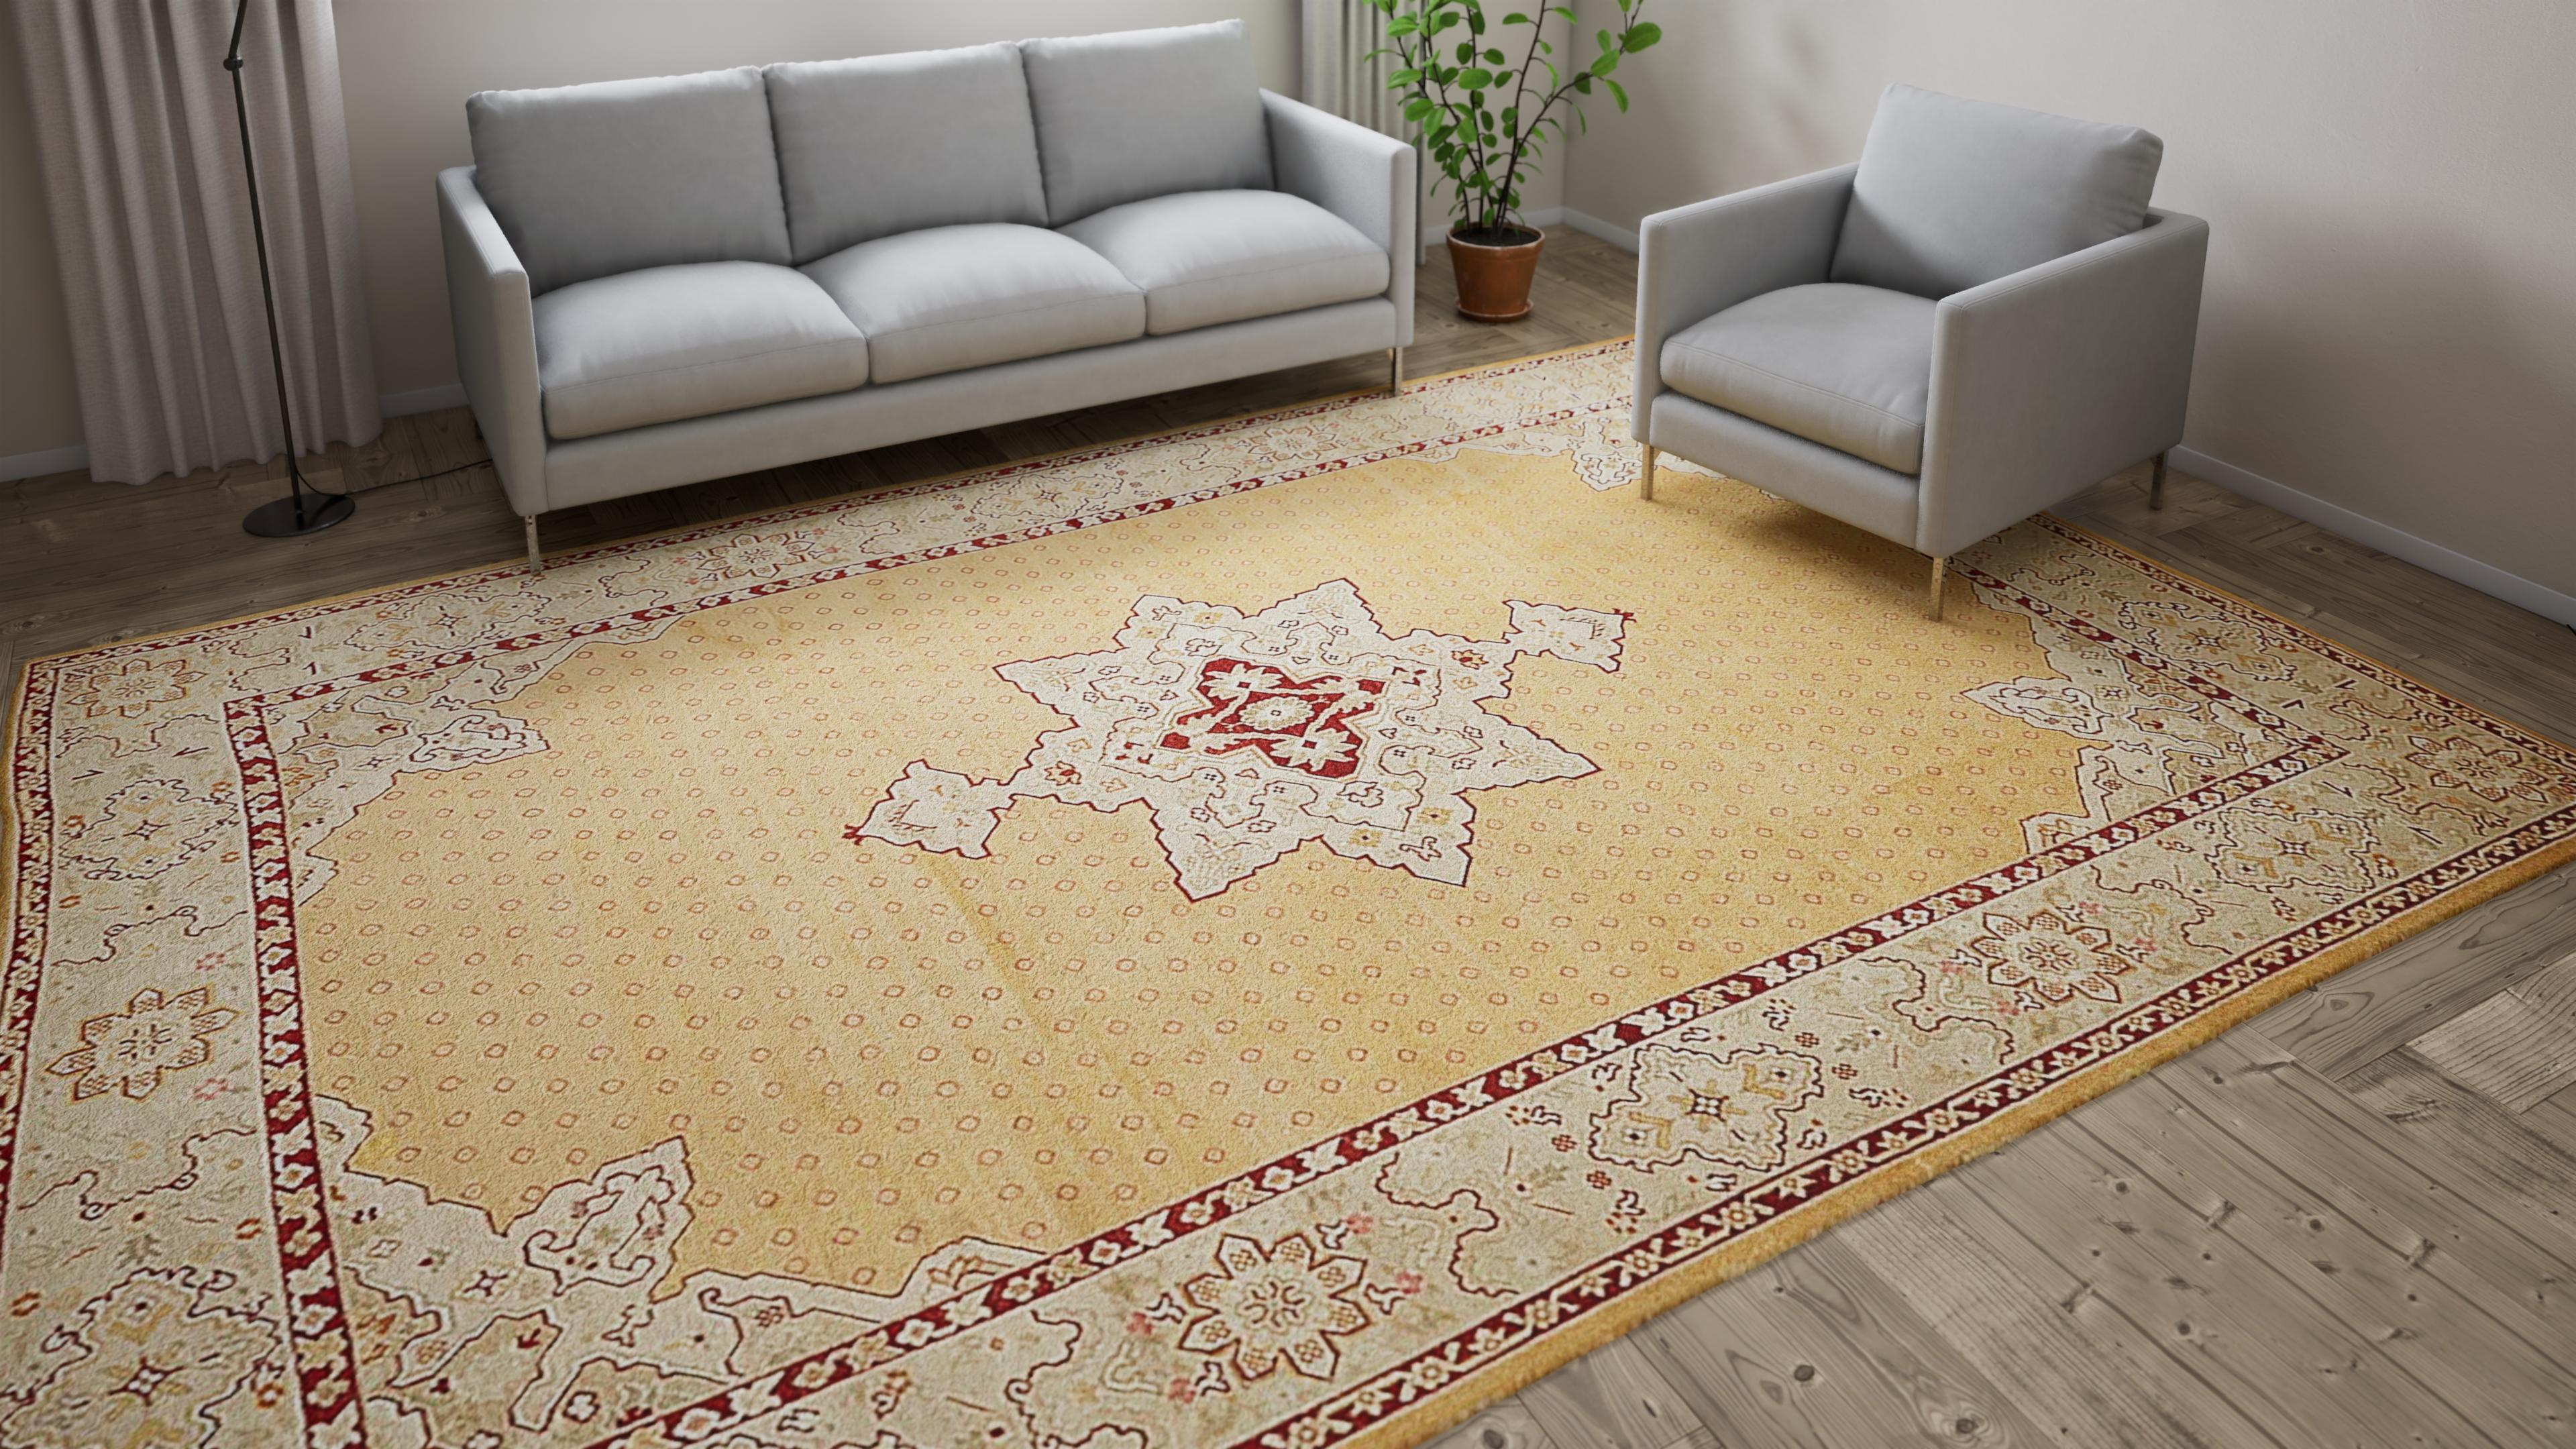 An exemplary of traditional design and craft, this wool rug brings texture and richness to modern spaces.